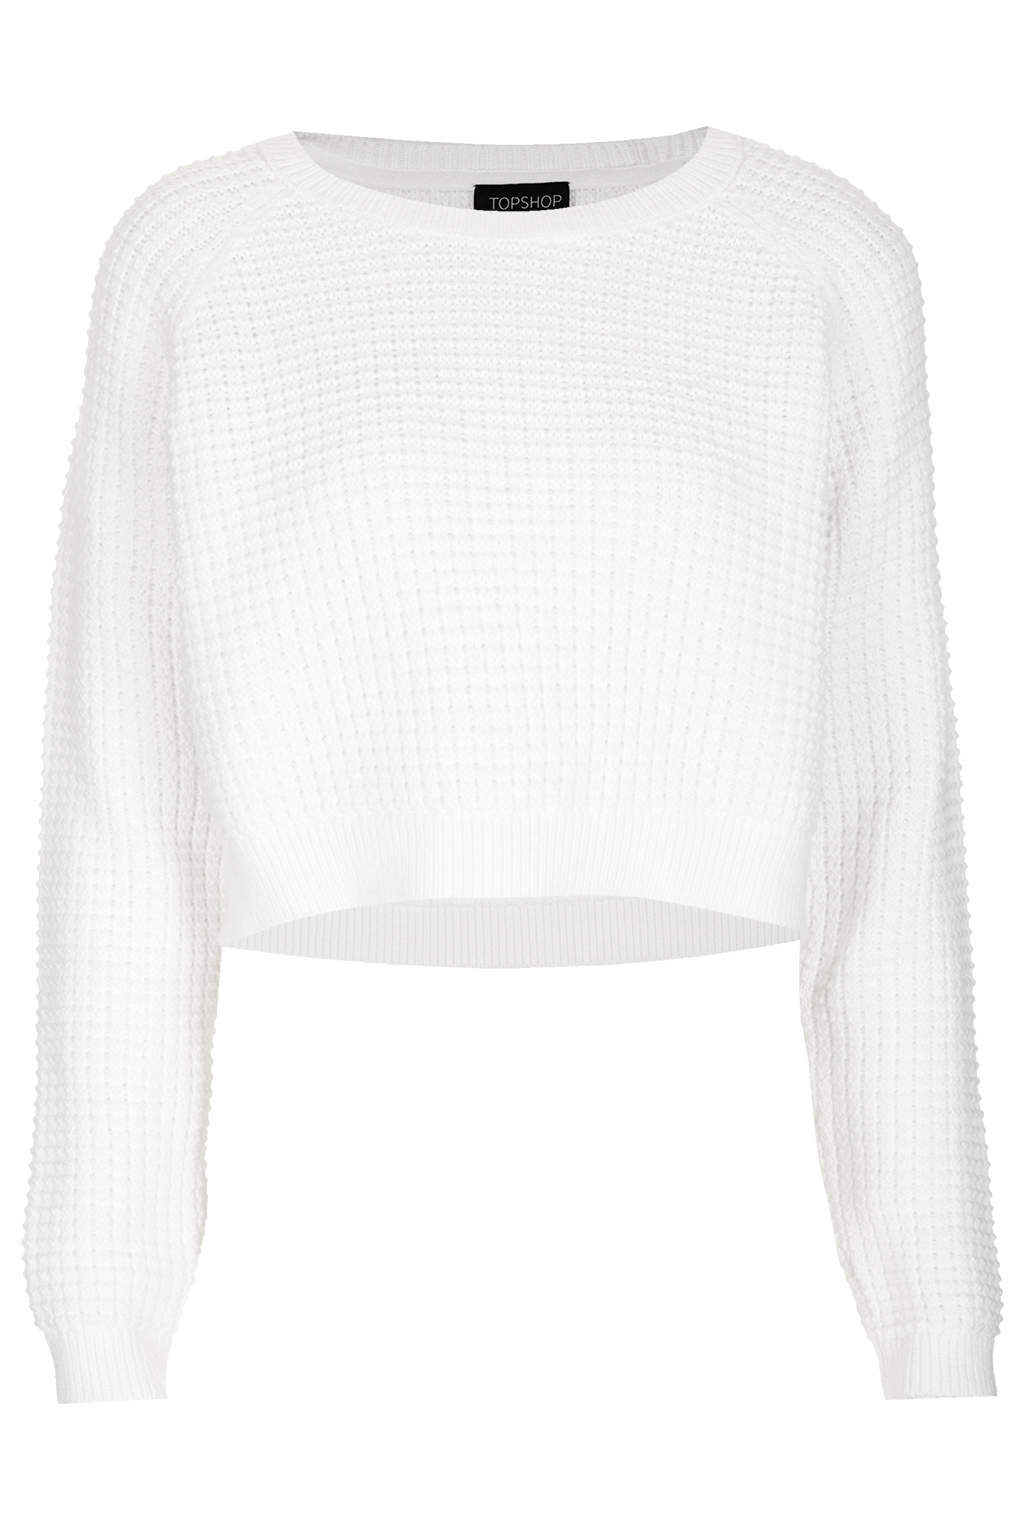 Lyst - Topshop Fisherman Cropped Sweater in White